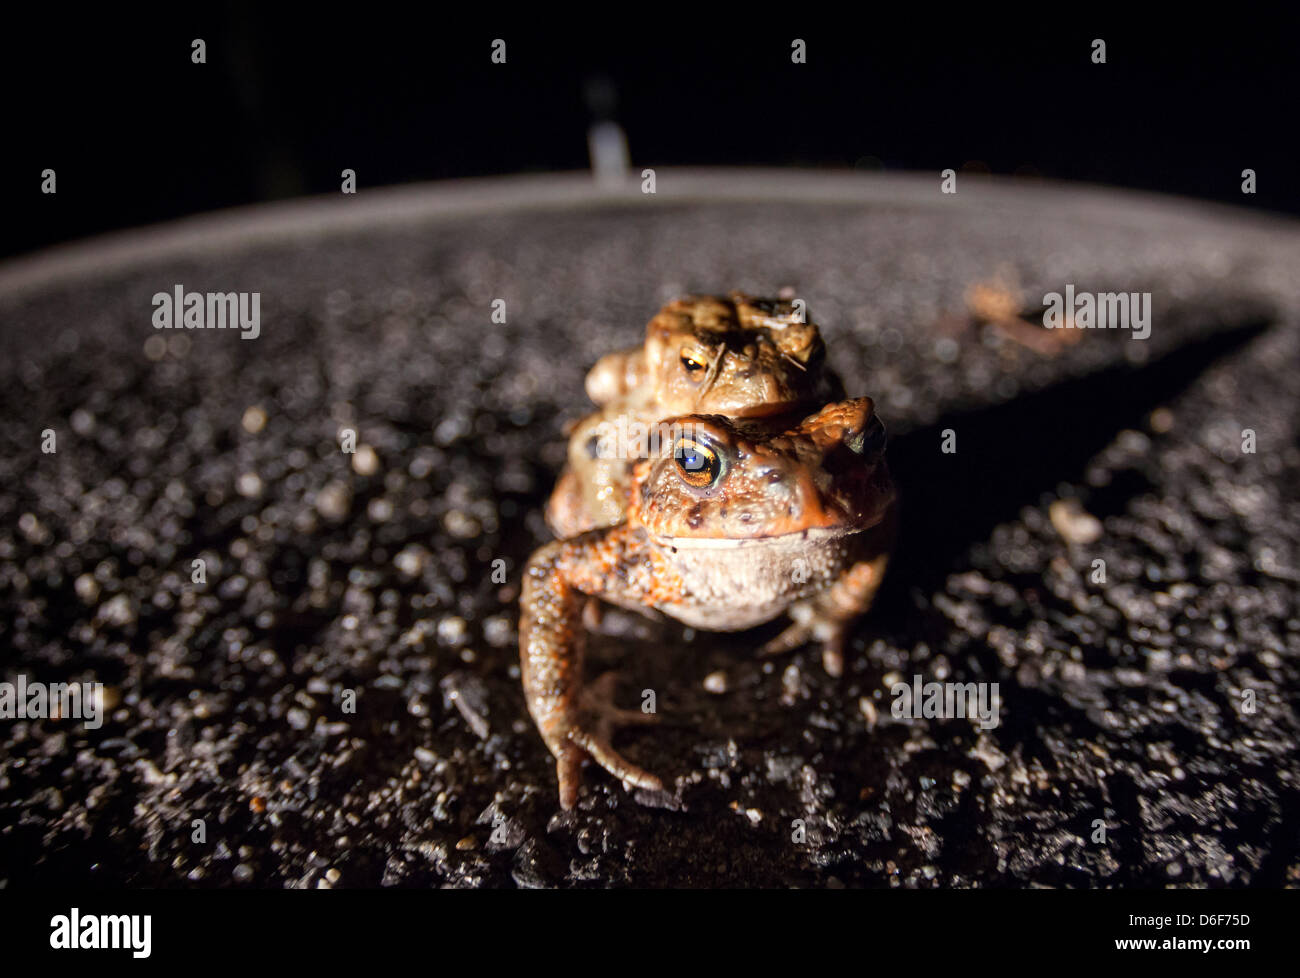 Germany/Saxony/Bluno, toad migratiion, two toads (european toad - bufo bufo) sit on a street at night, 16 April 2013 Stock Photo